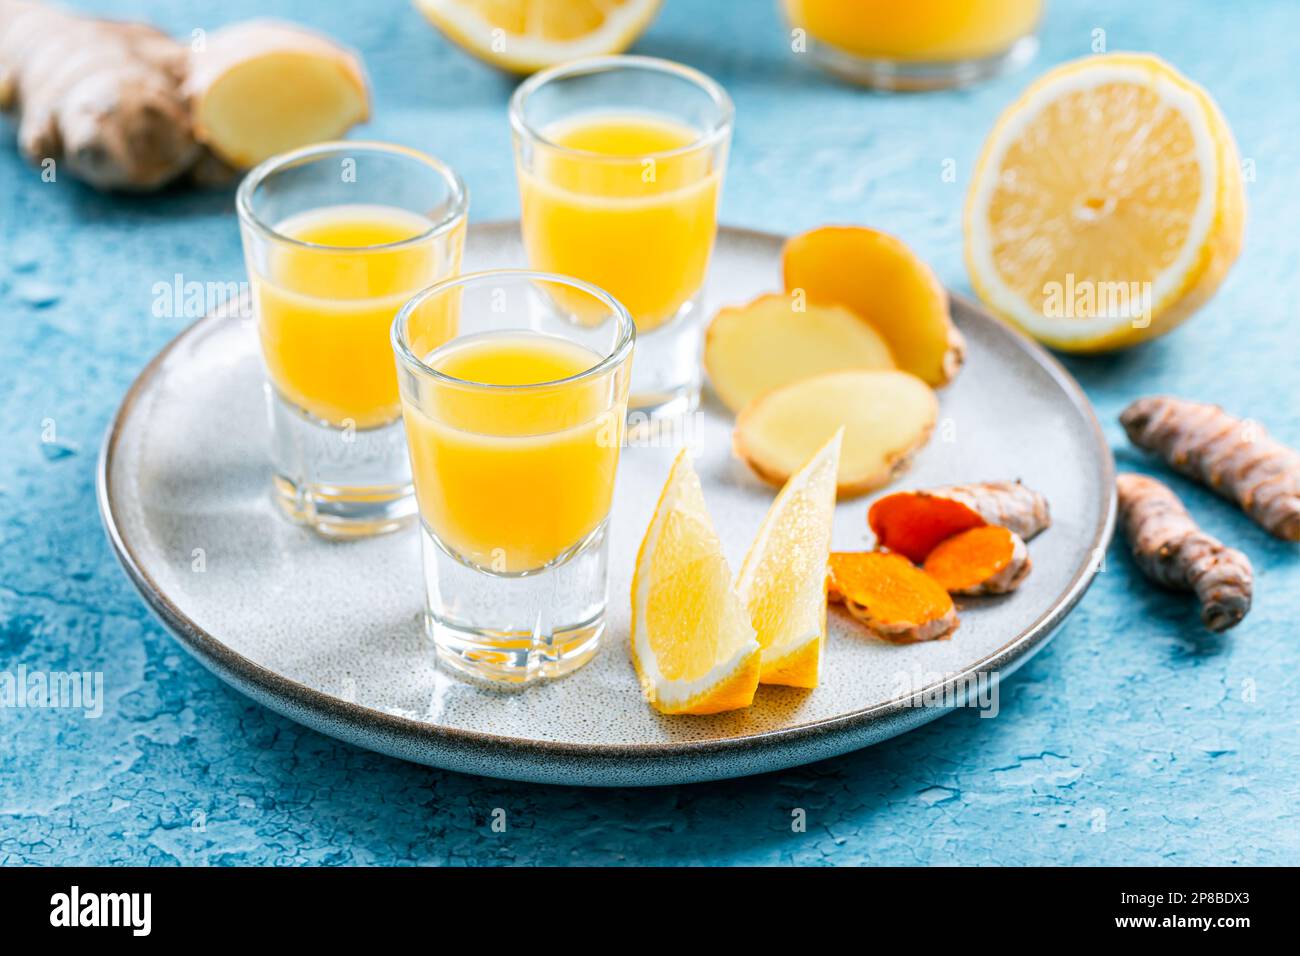 Boosting immune system - homemade healthy Ginger Lemon Turmeric Shot with ingredients Stock Photo